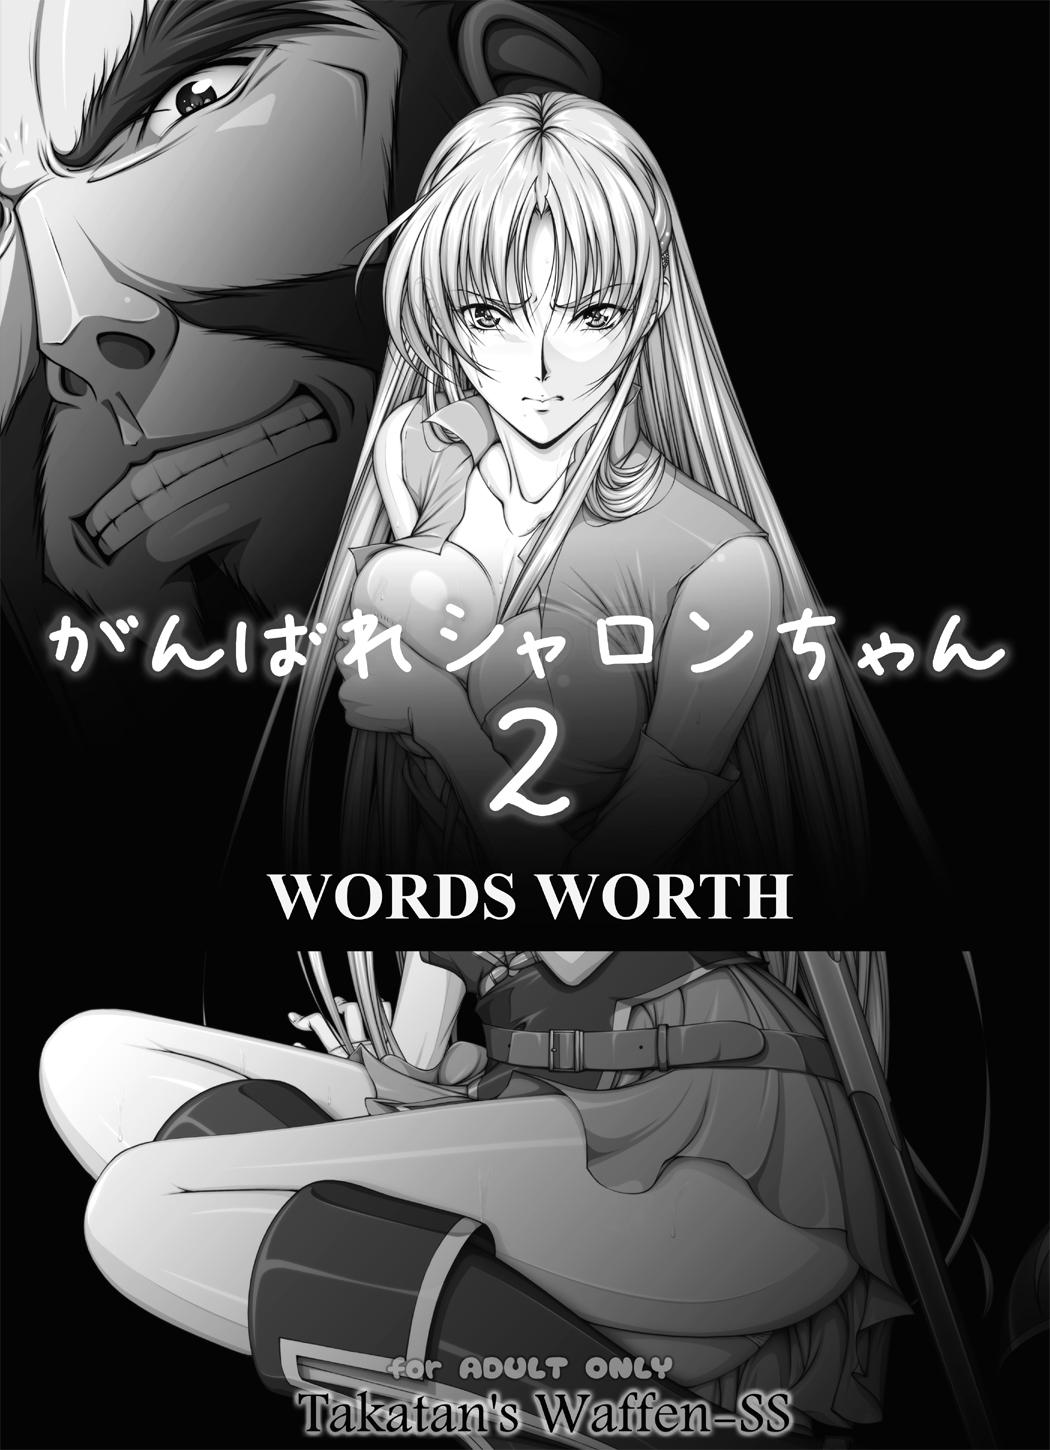 Slim [Takatan's Waffen-SS] Fight, Sharon! 2 [Deluxe Edition] (Words Worth) +omake - Words worth Groupfuck - Page 8